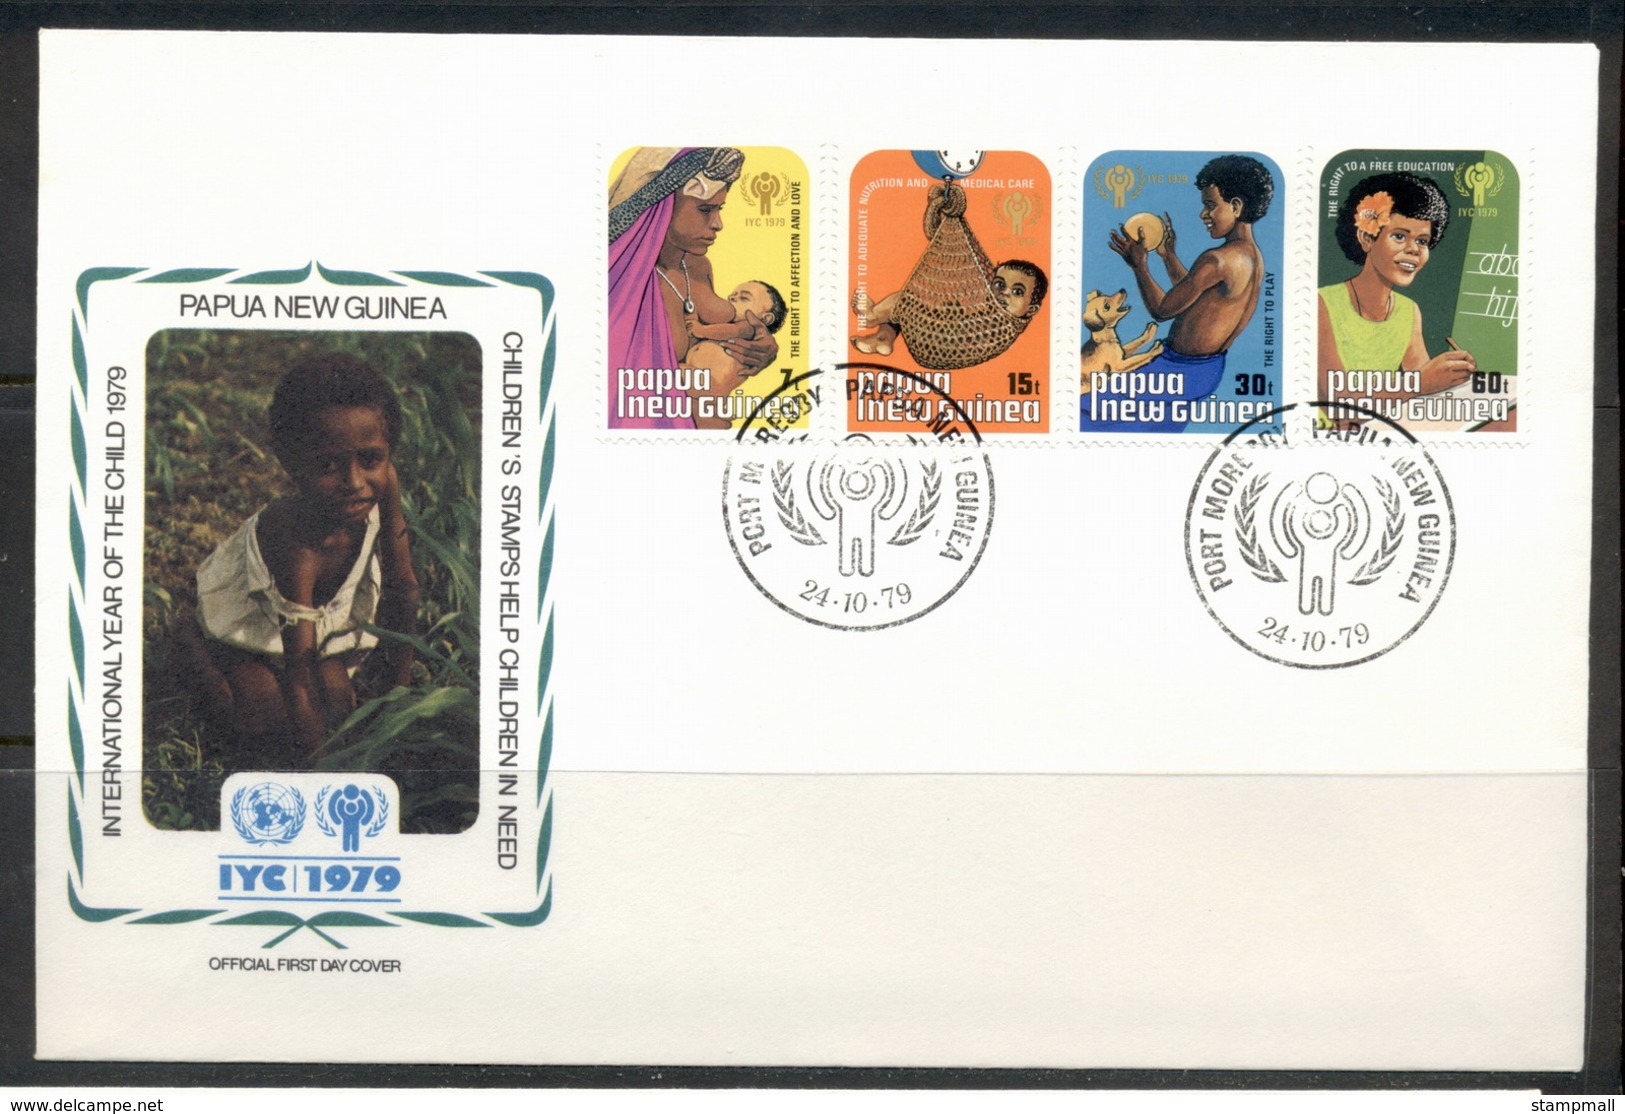 PNG 1979 IYC International Year Of The Child FDC - Papua New Guinea